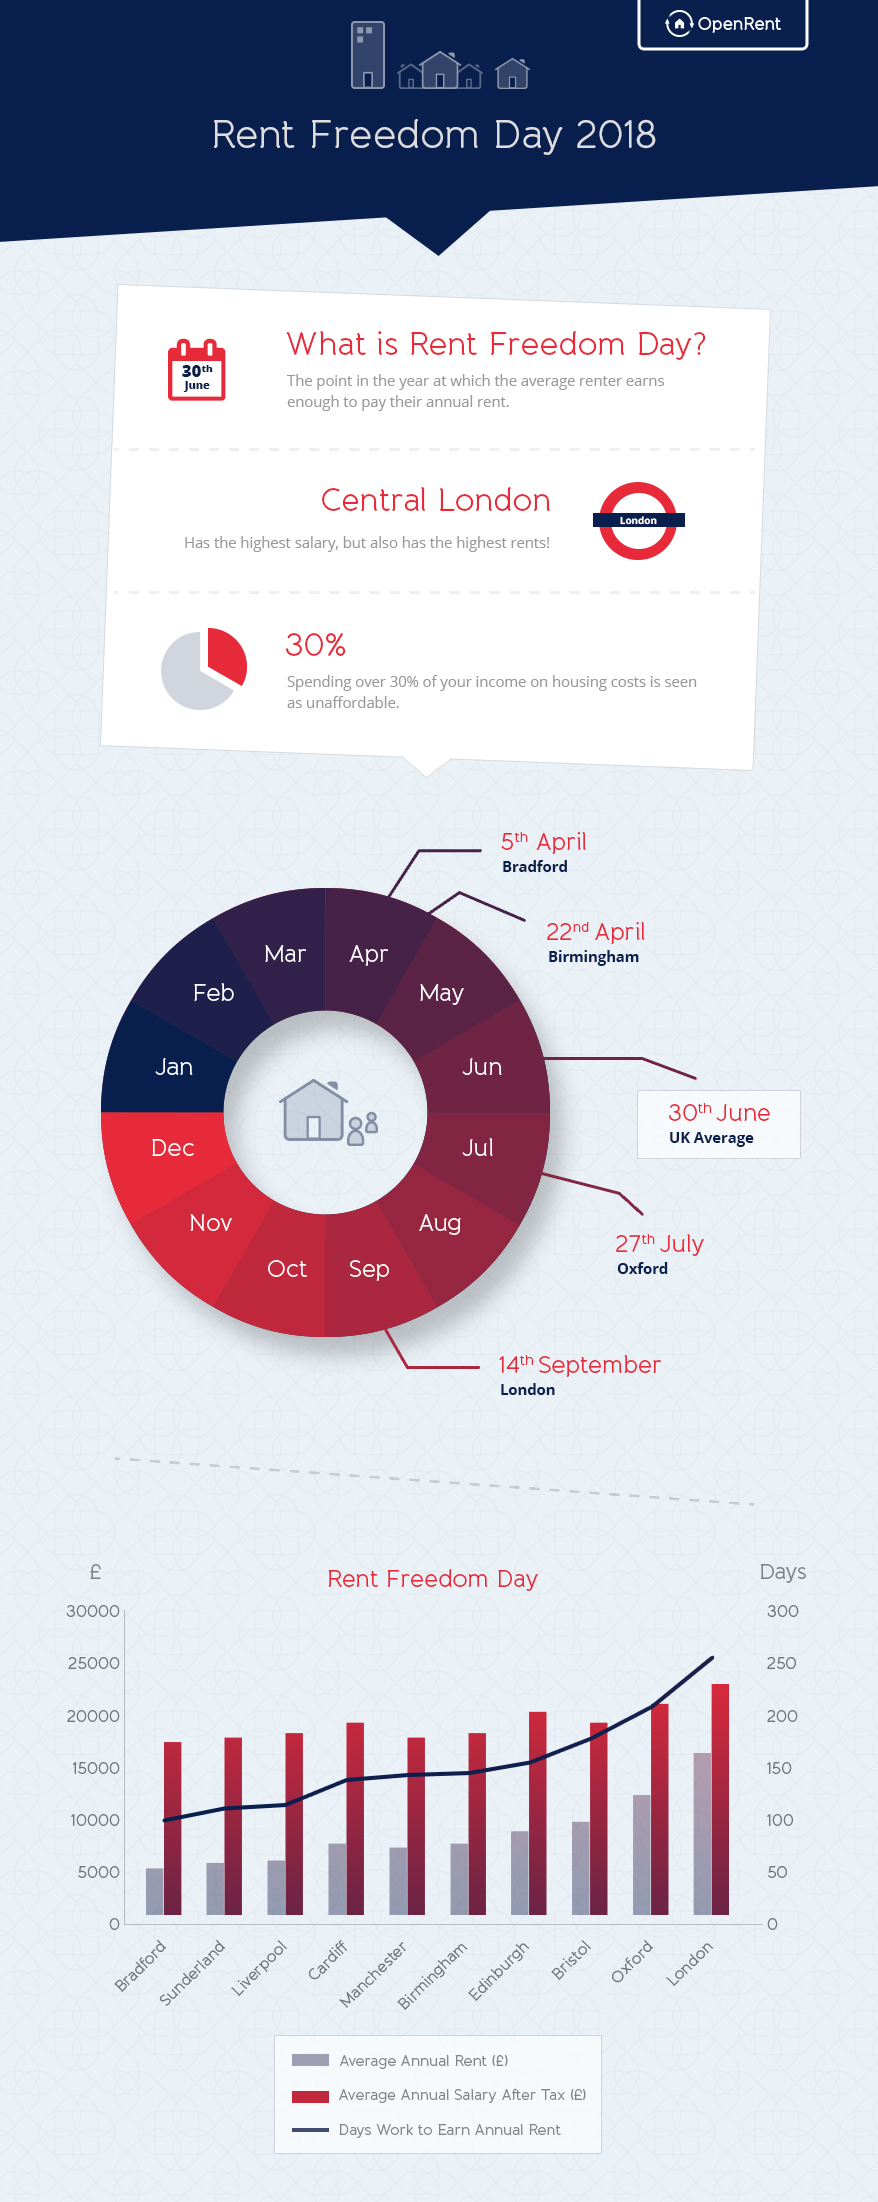 Rent Freedom Day Infographic_Embargoed until 20th Feb